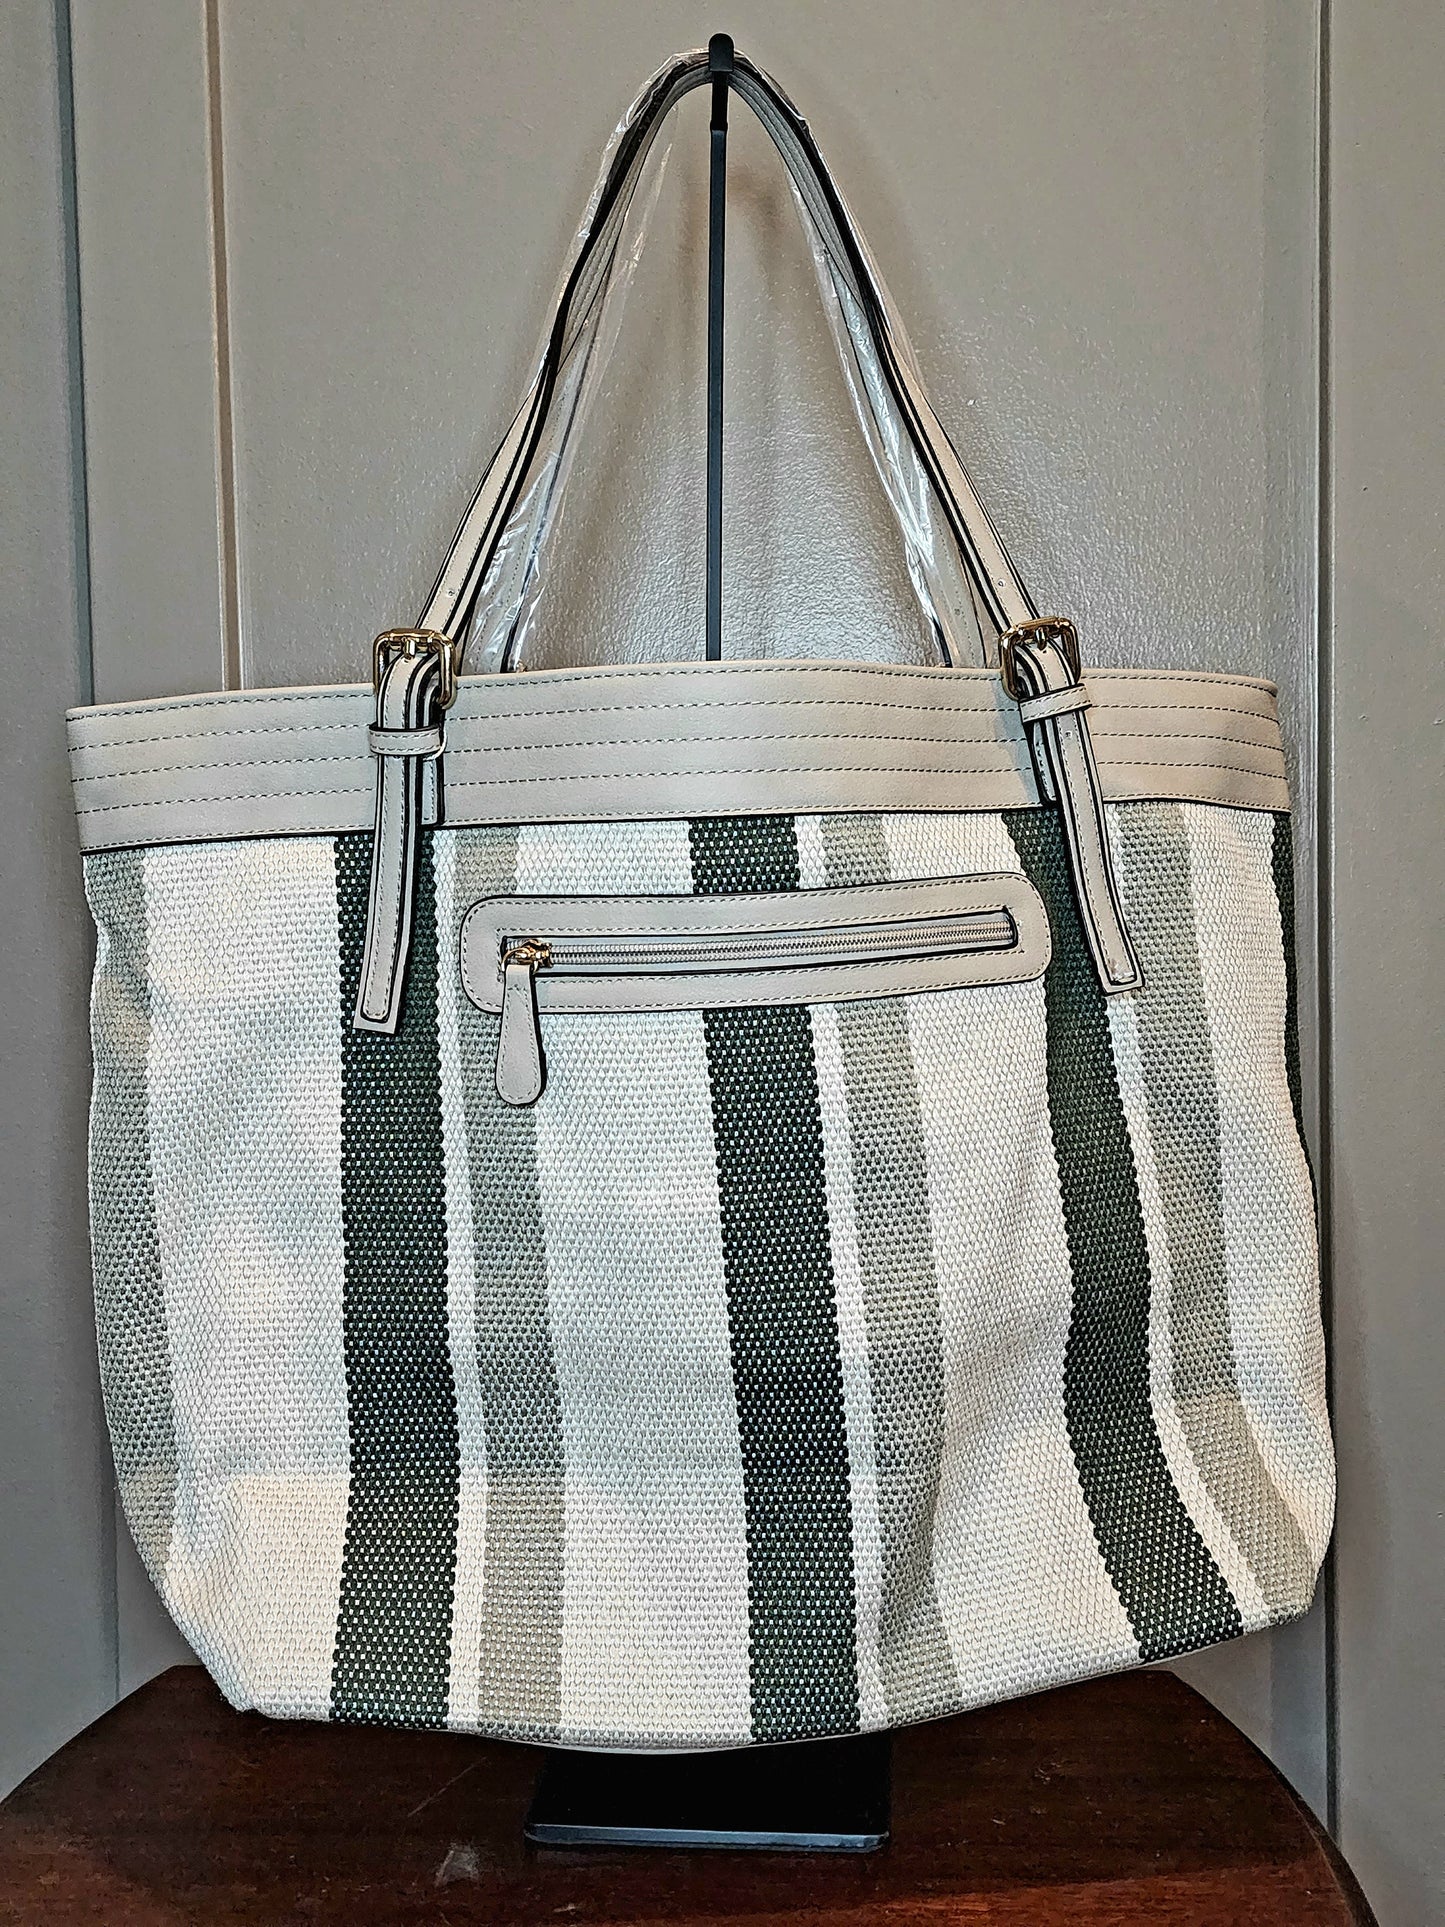 Textured Striped Tote